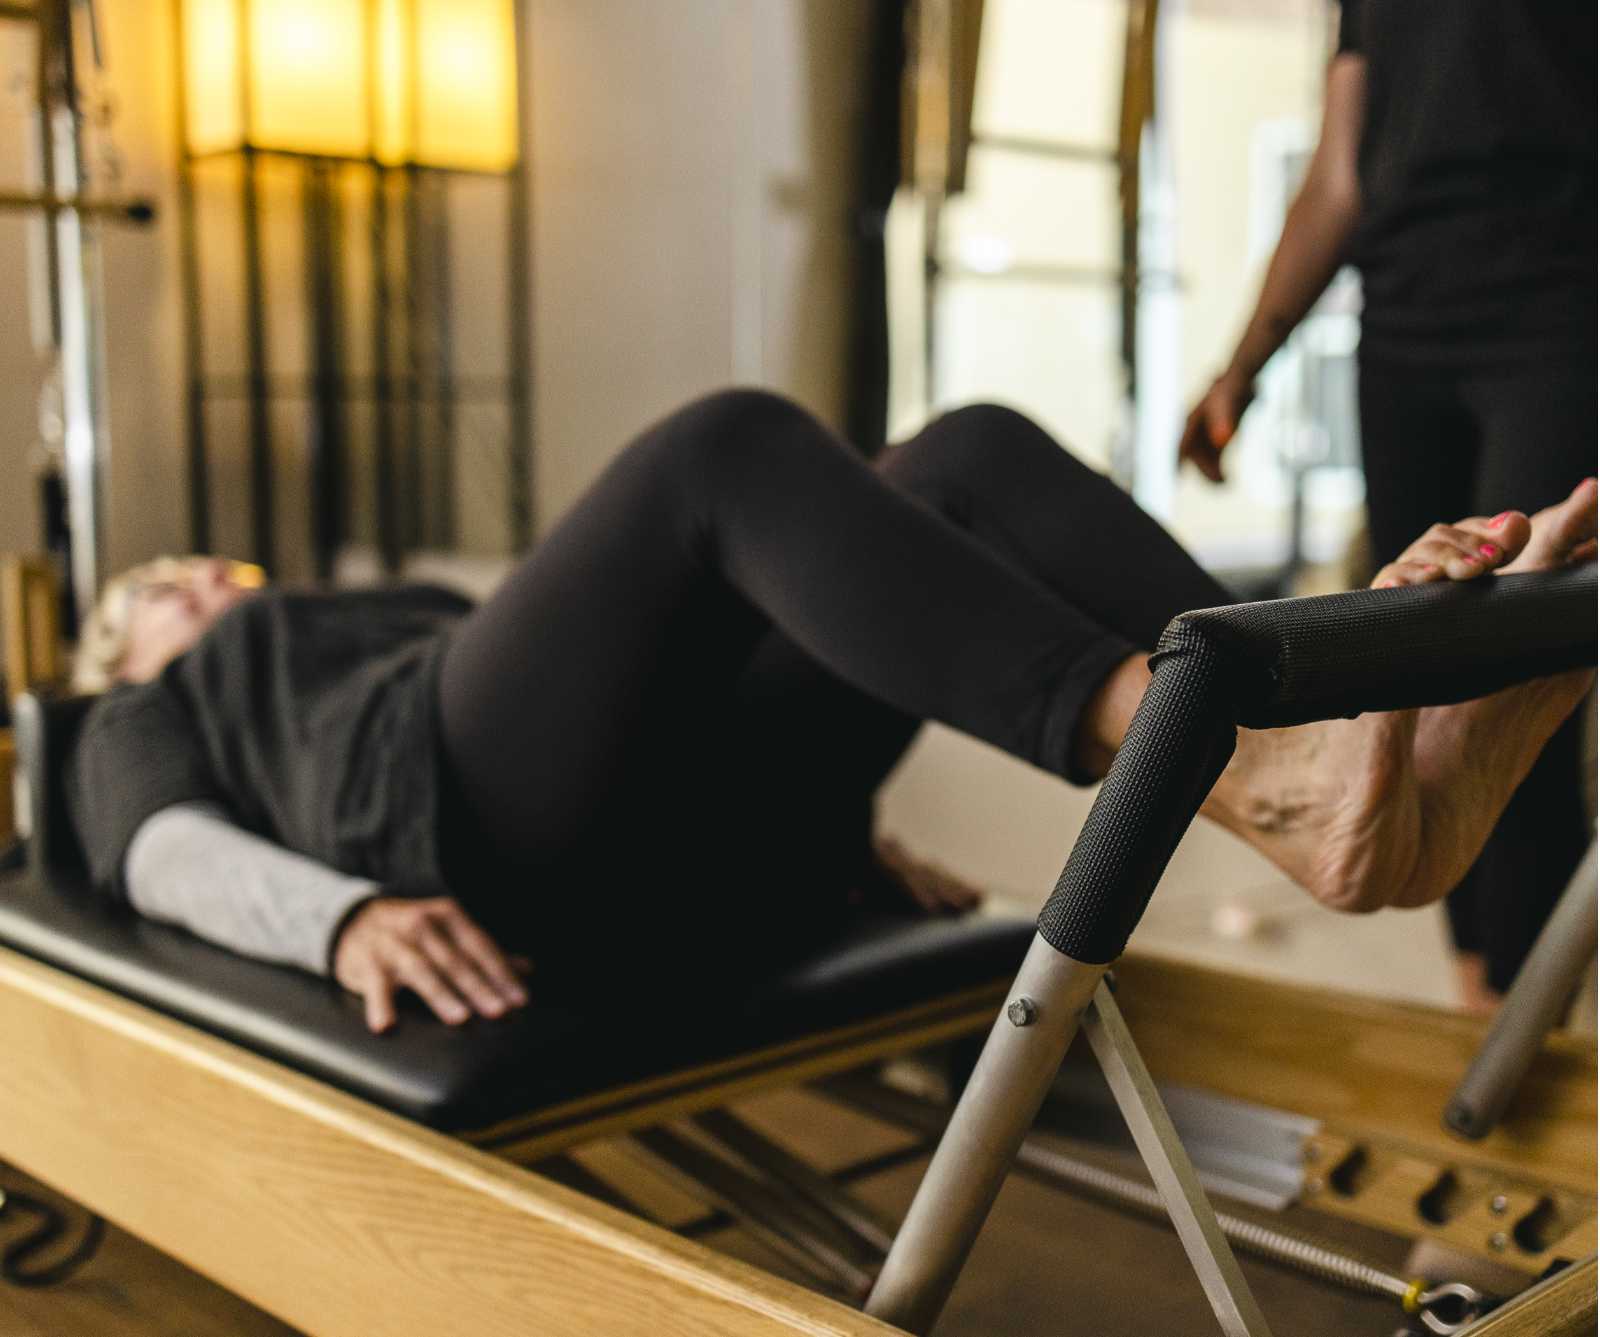 A woman uses her legs to push on the pilates reformer bar